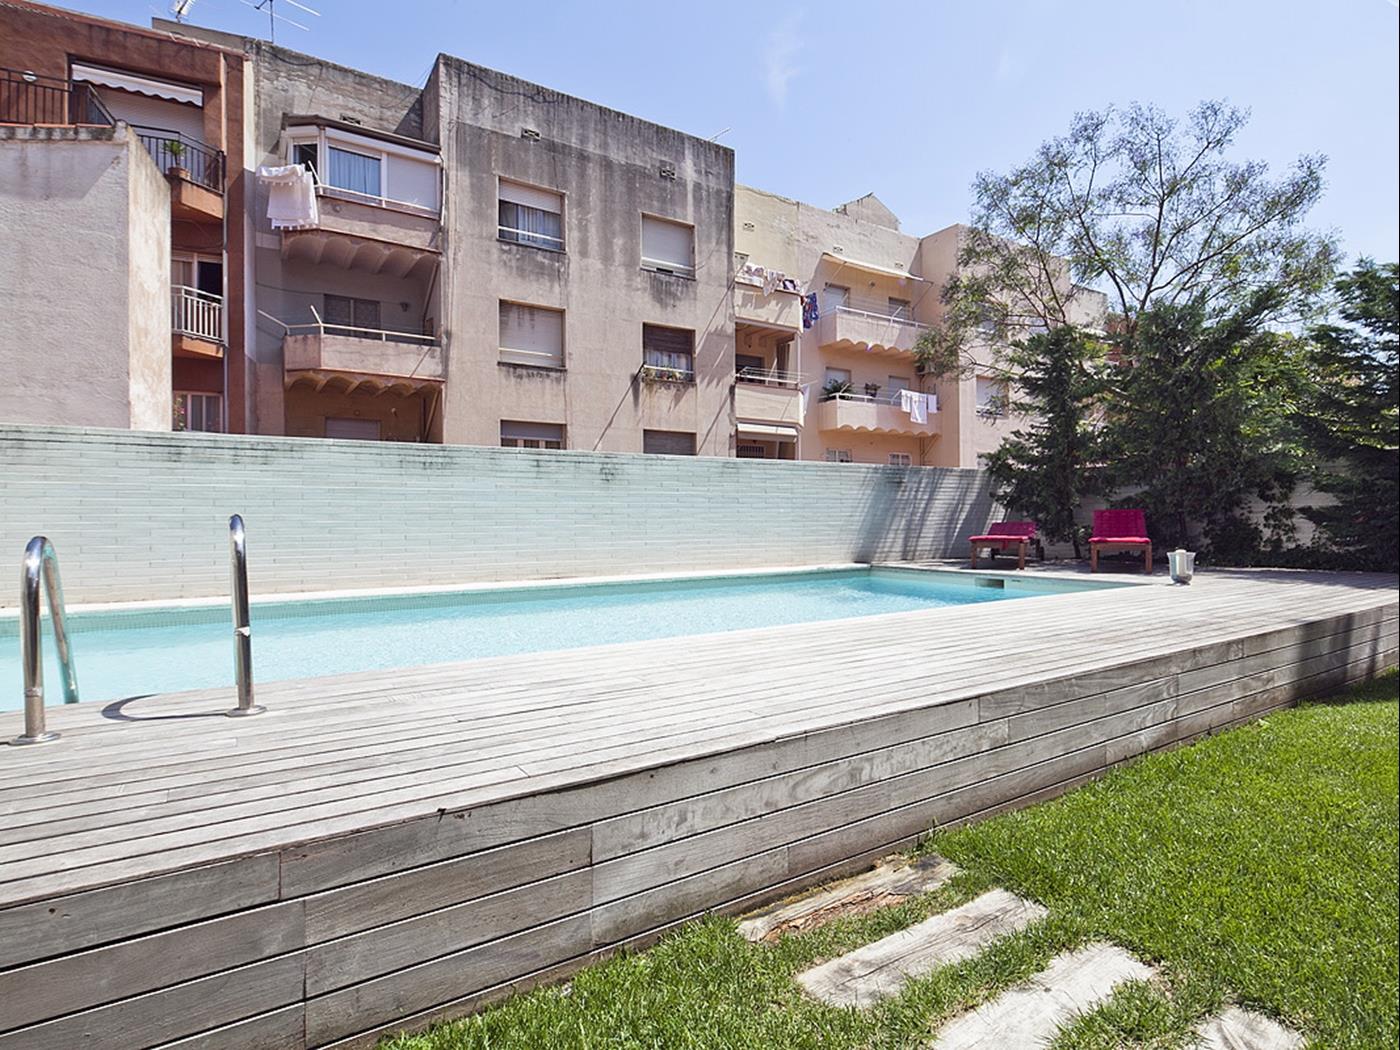 Apartment with Swimming Pool near Sagrada Familia - My Space Barcelona Aпартаменты